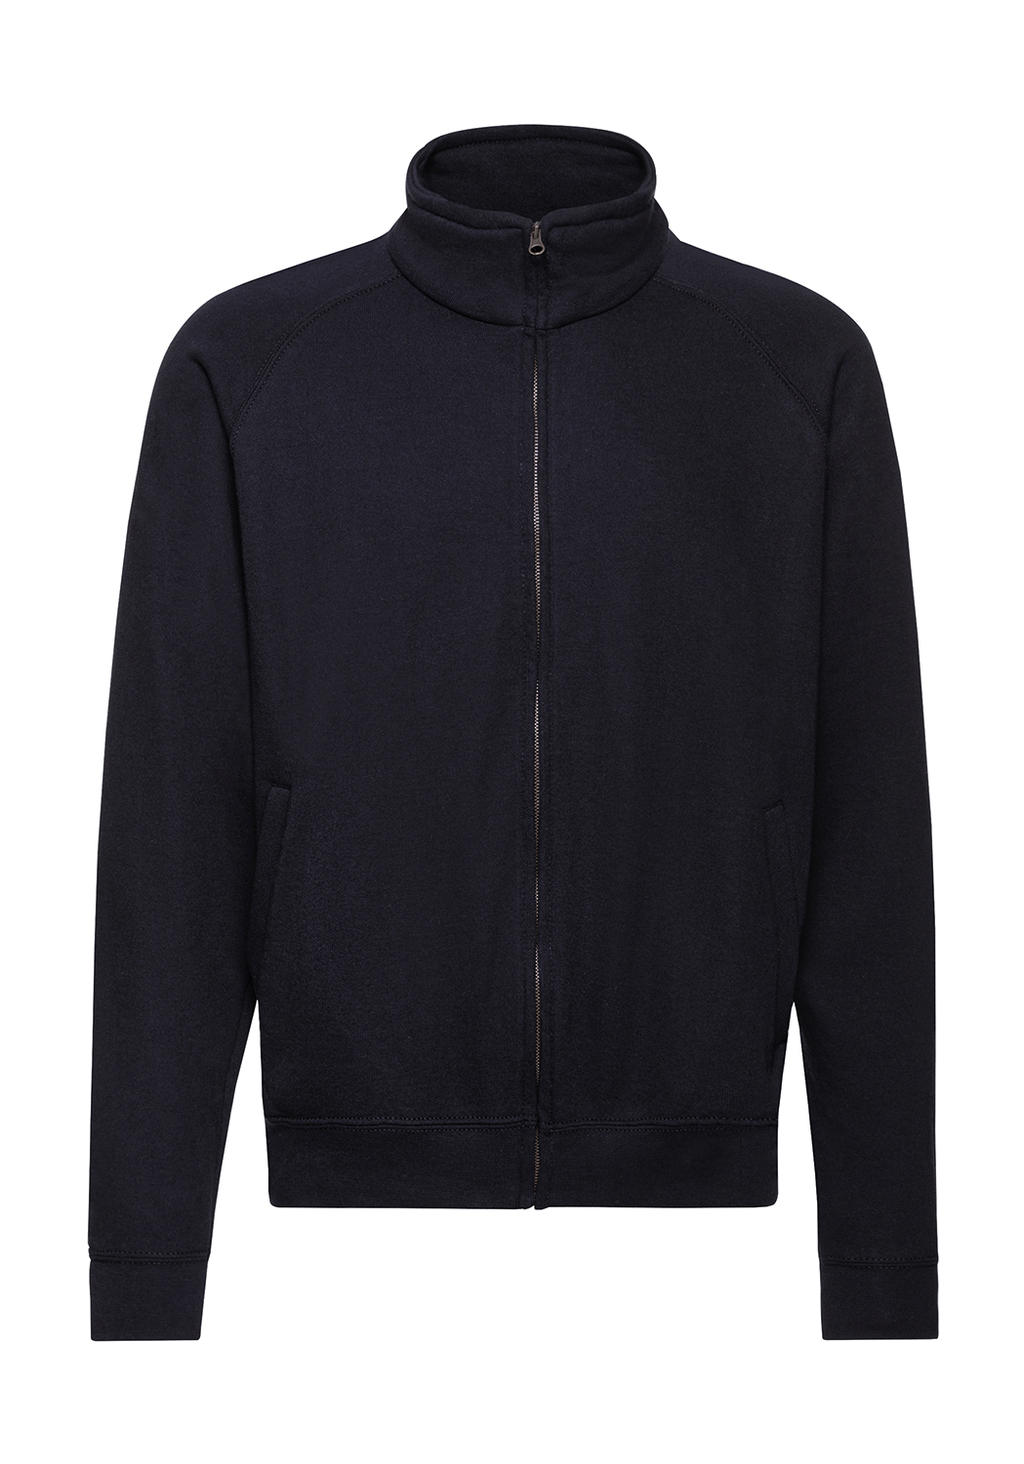  Classic Sweat Jacket in Farbe Deep Navy